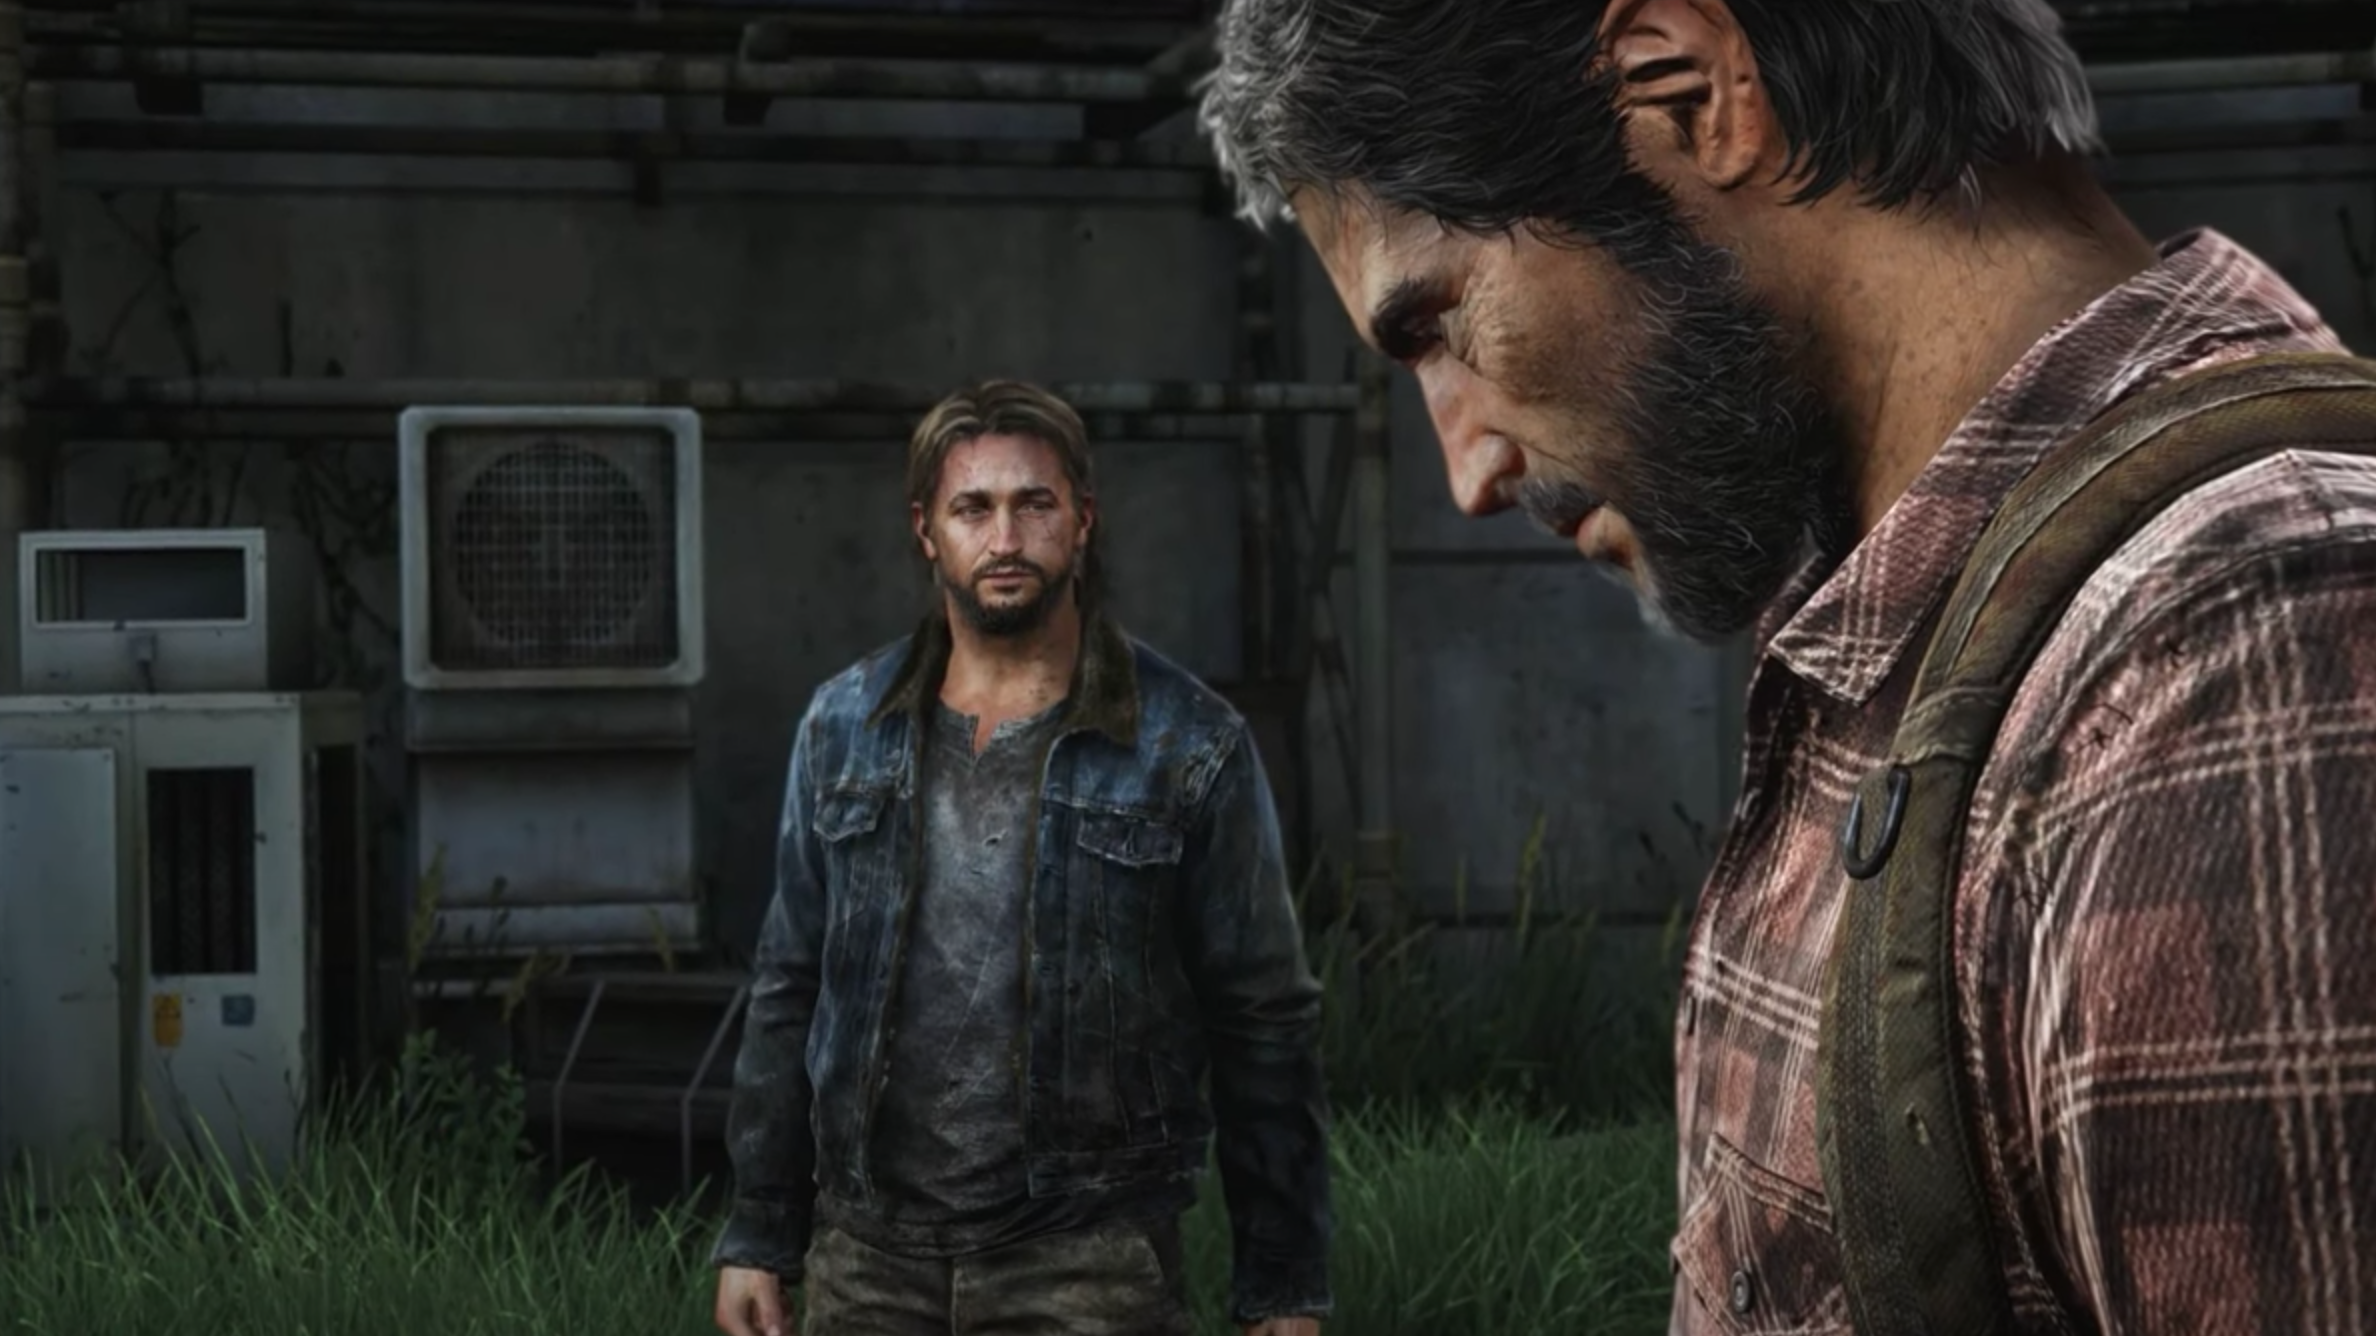 Joel (The Last of Us)  The last of us, Video game characters, The